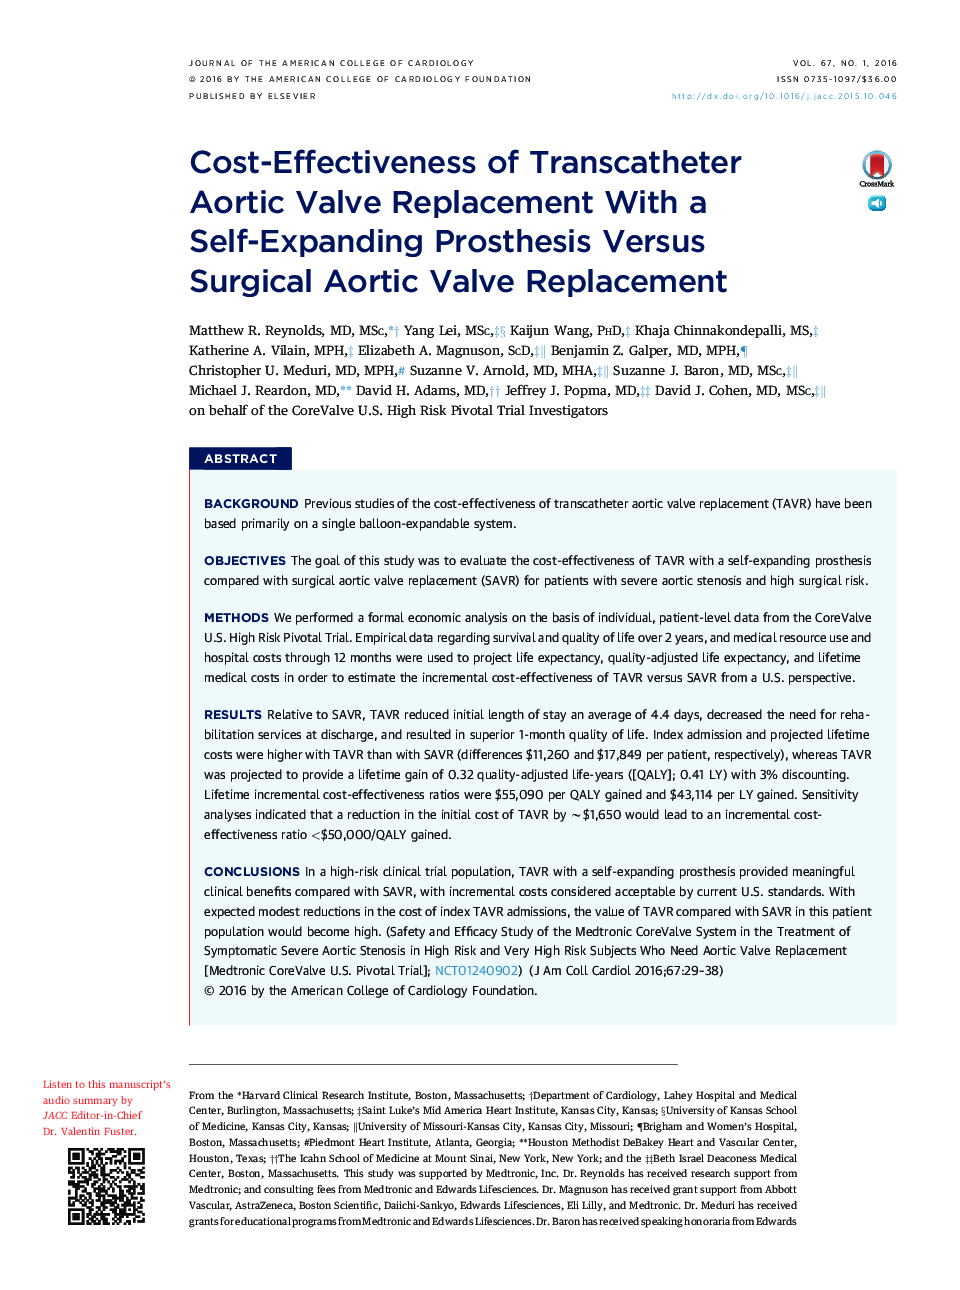 Cost-Effectiveness of Transcatheter Aortic Valve Replacement With a Self-Expanding Prosthesis Versus SurgicalÂ Aortic Valve Replacement